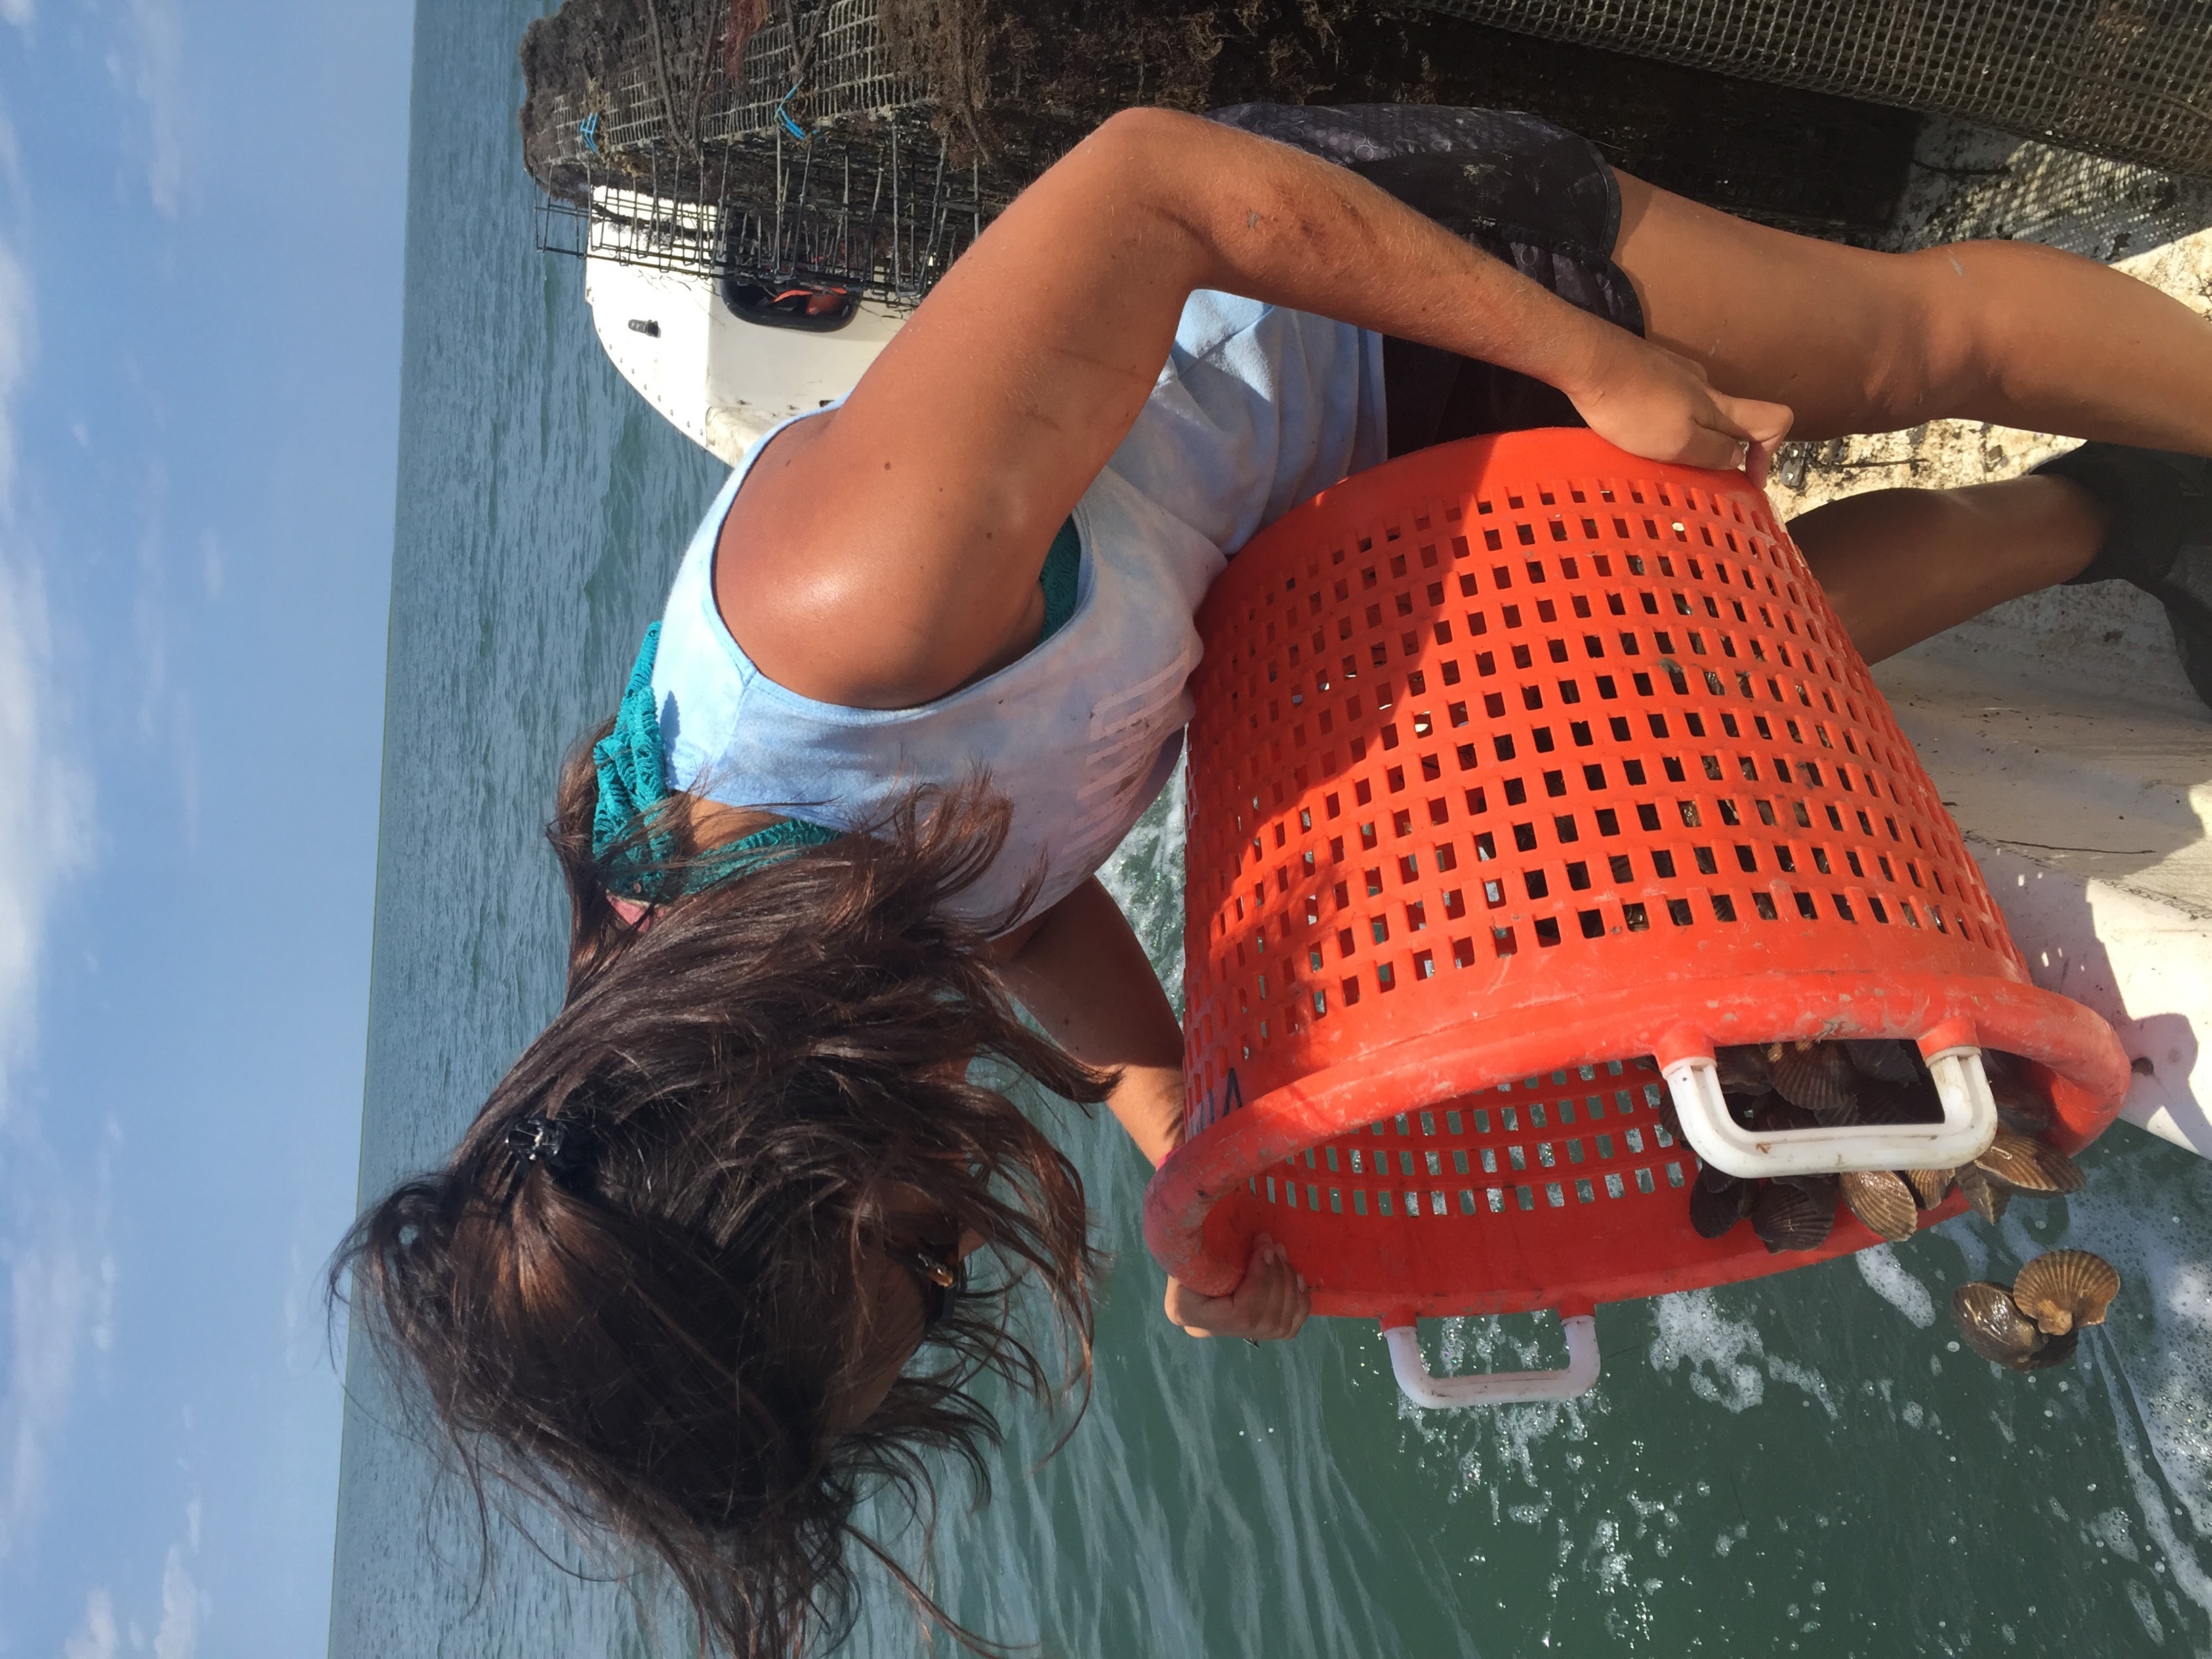 Adult bay scallop are released in South Bay at 14 months old